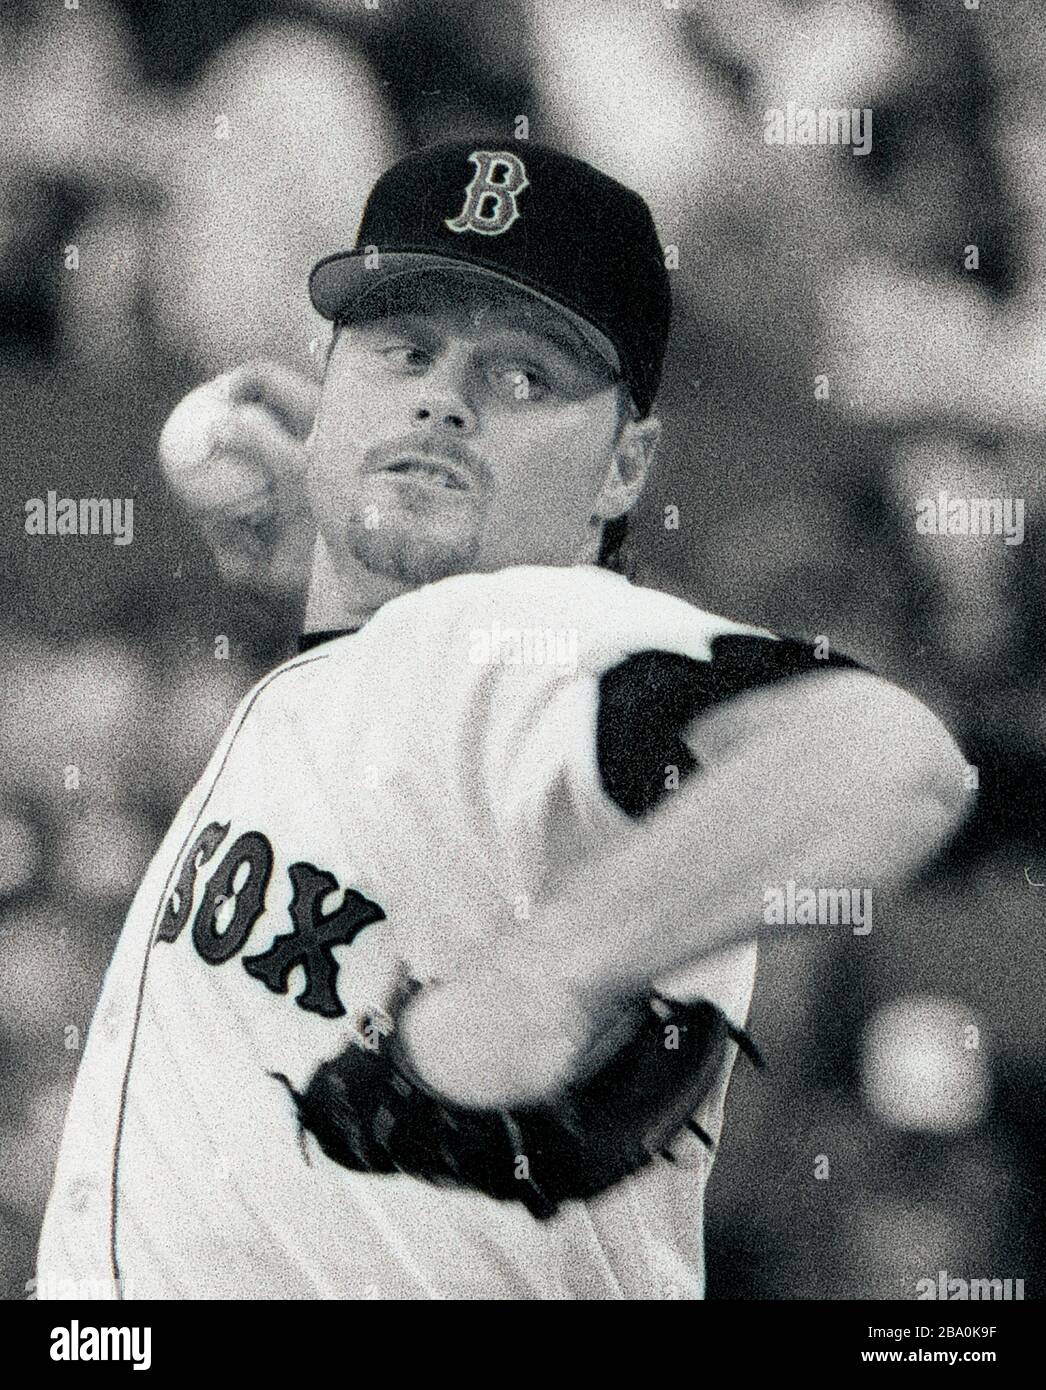 Boston Red Sox pitcher Roger Clemens in baseball action at Fenway Park in Boston Ma USA 1995 photo by bill belknap Stock Photo